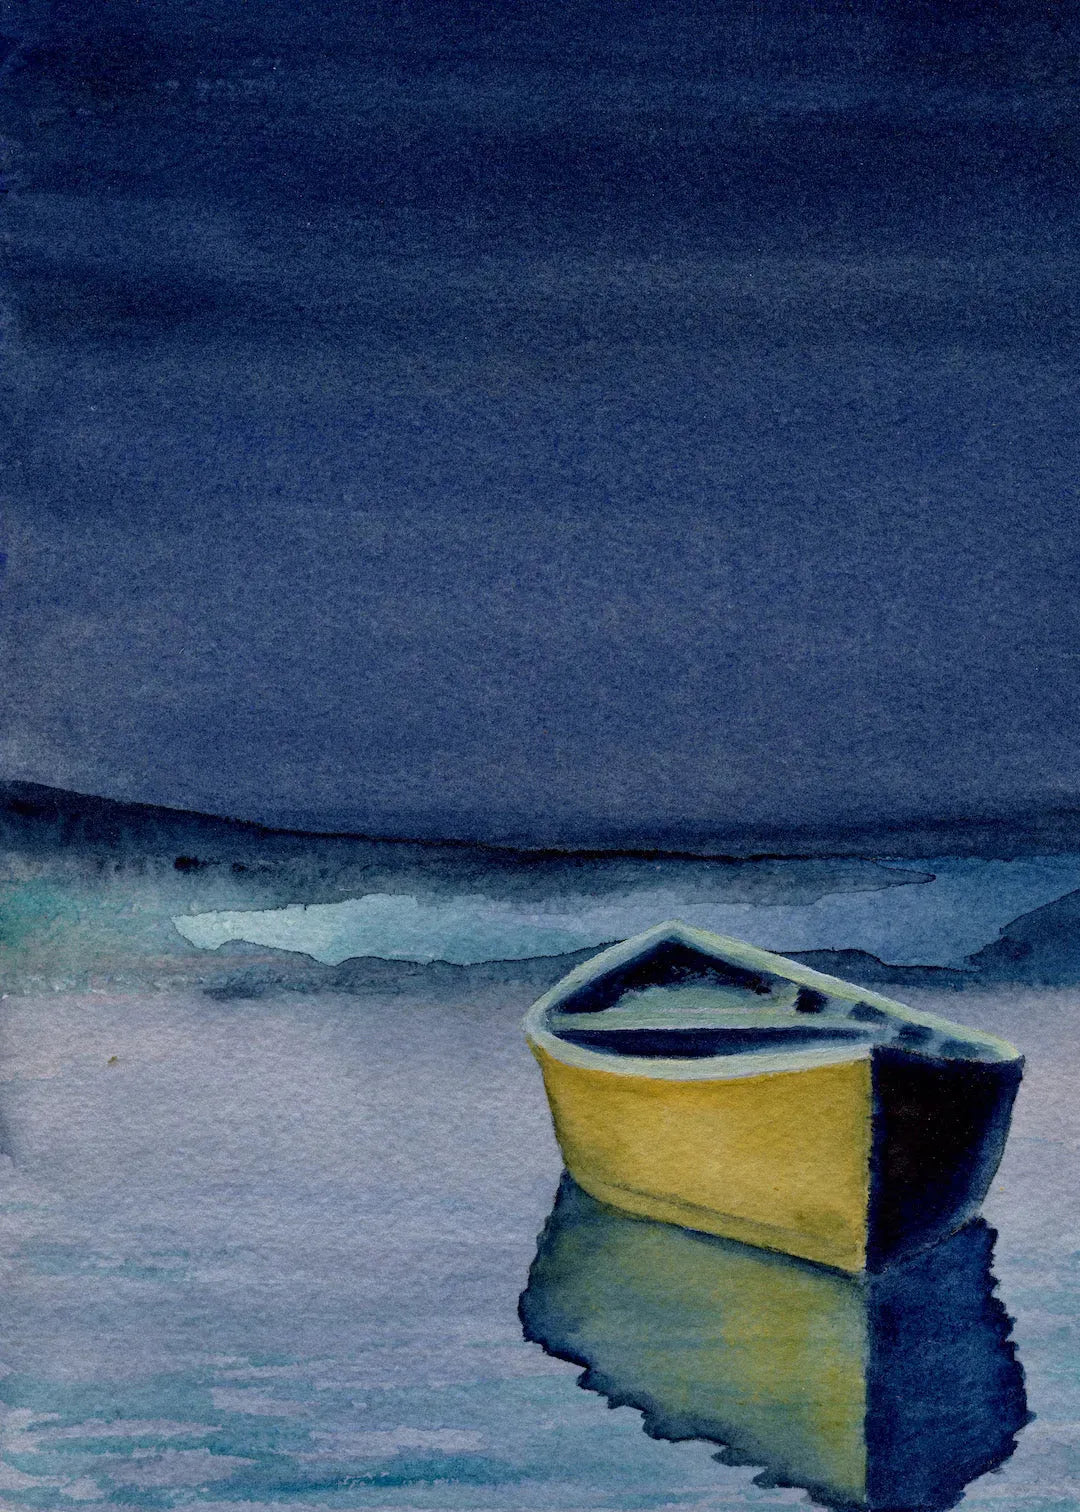 Beach Artwork, "Yellow Rowboat on Calm Water",  5 x 8 - SOLD - Art of the Sea 